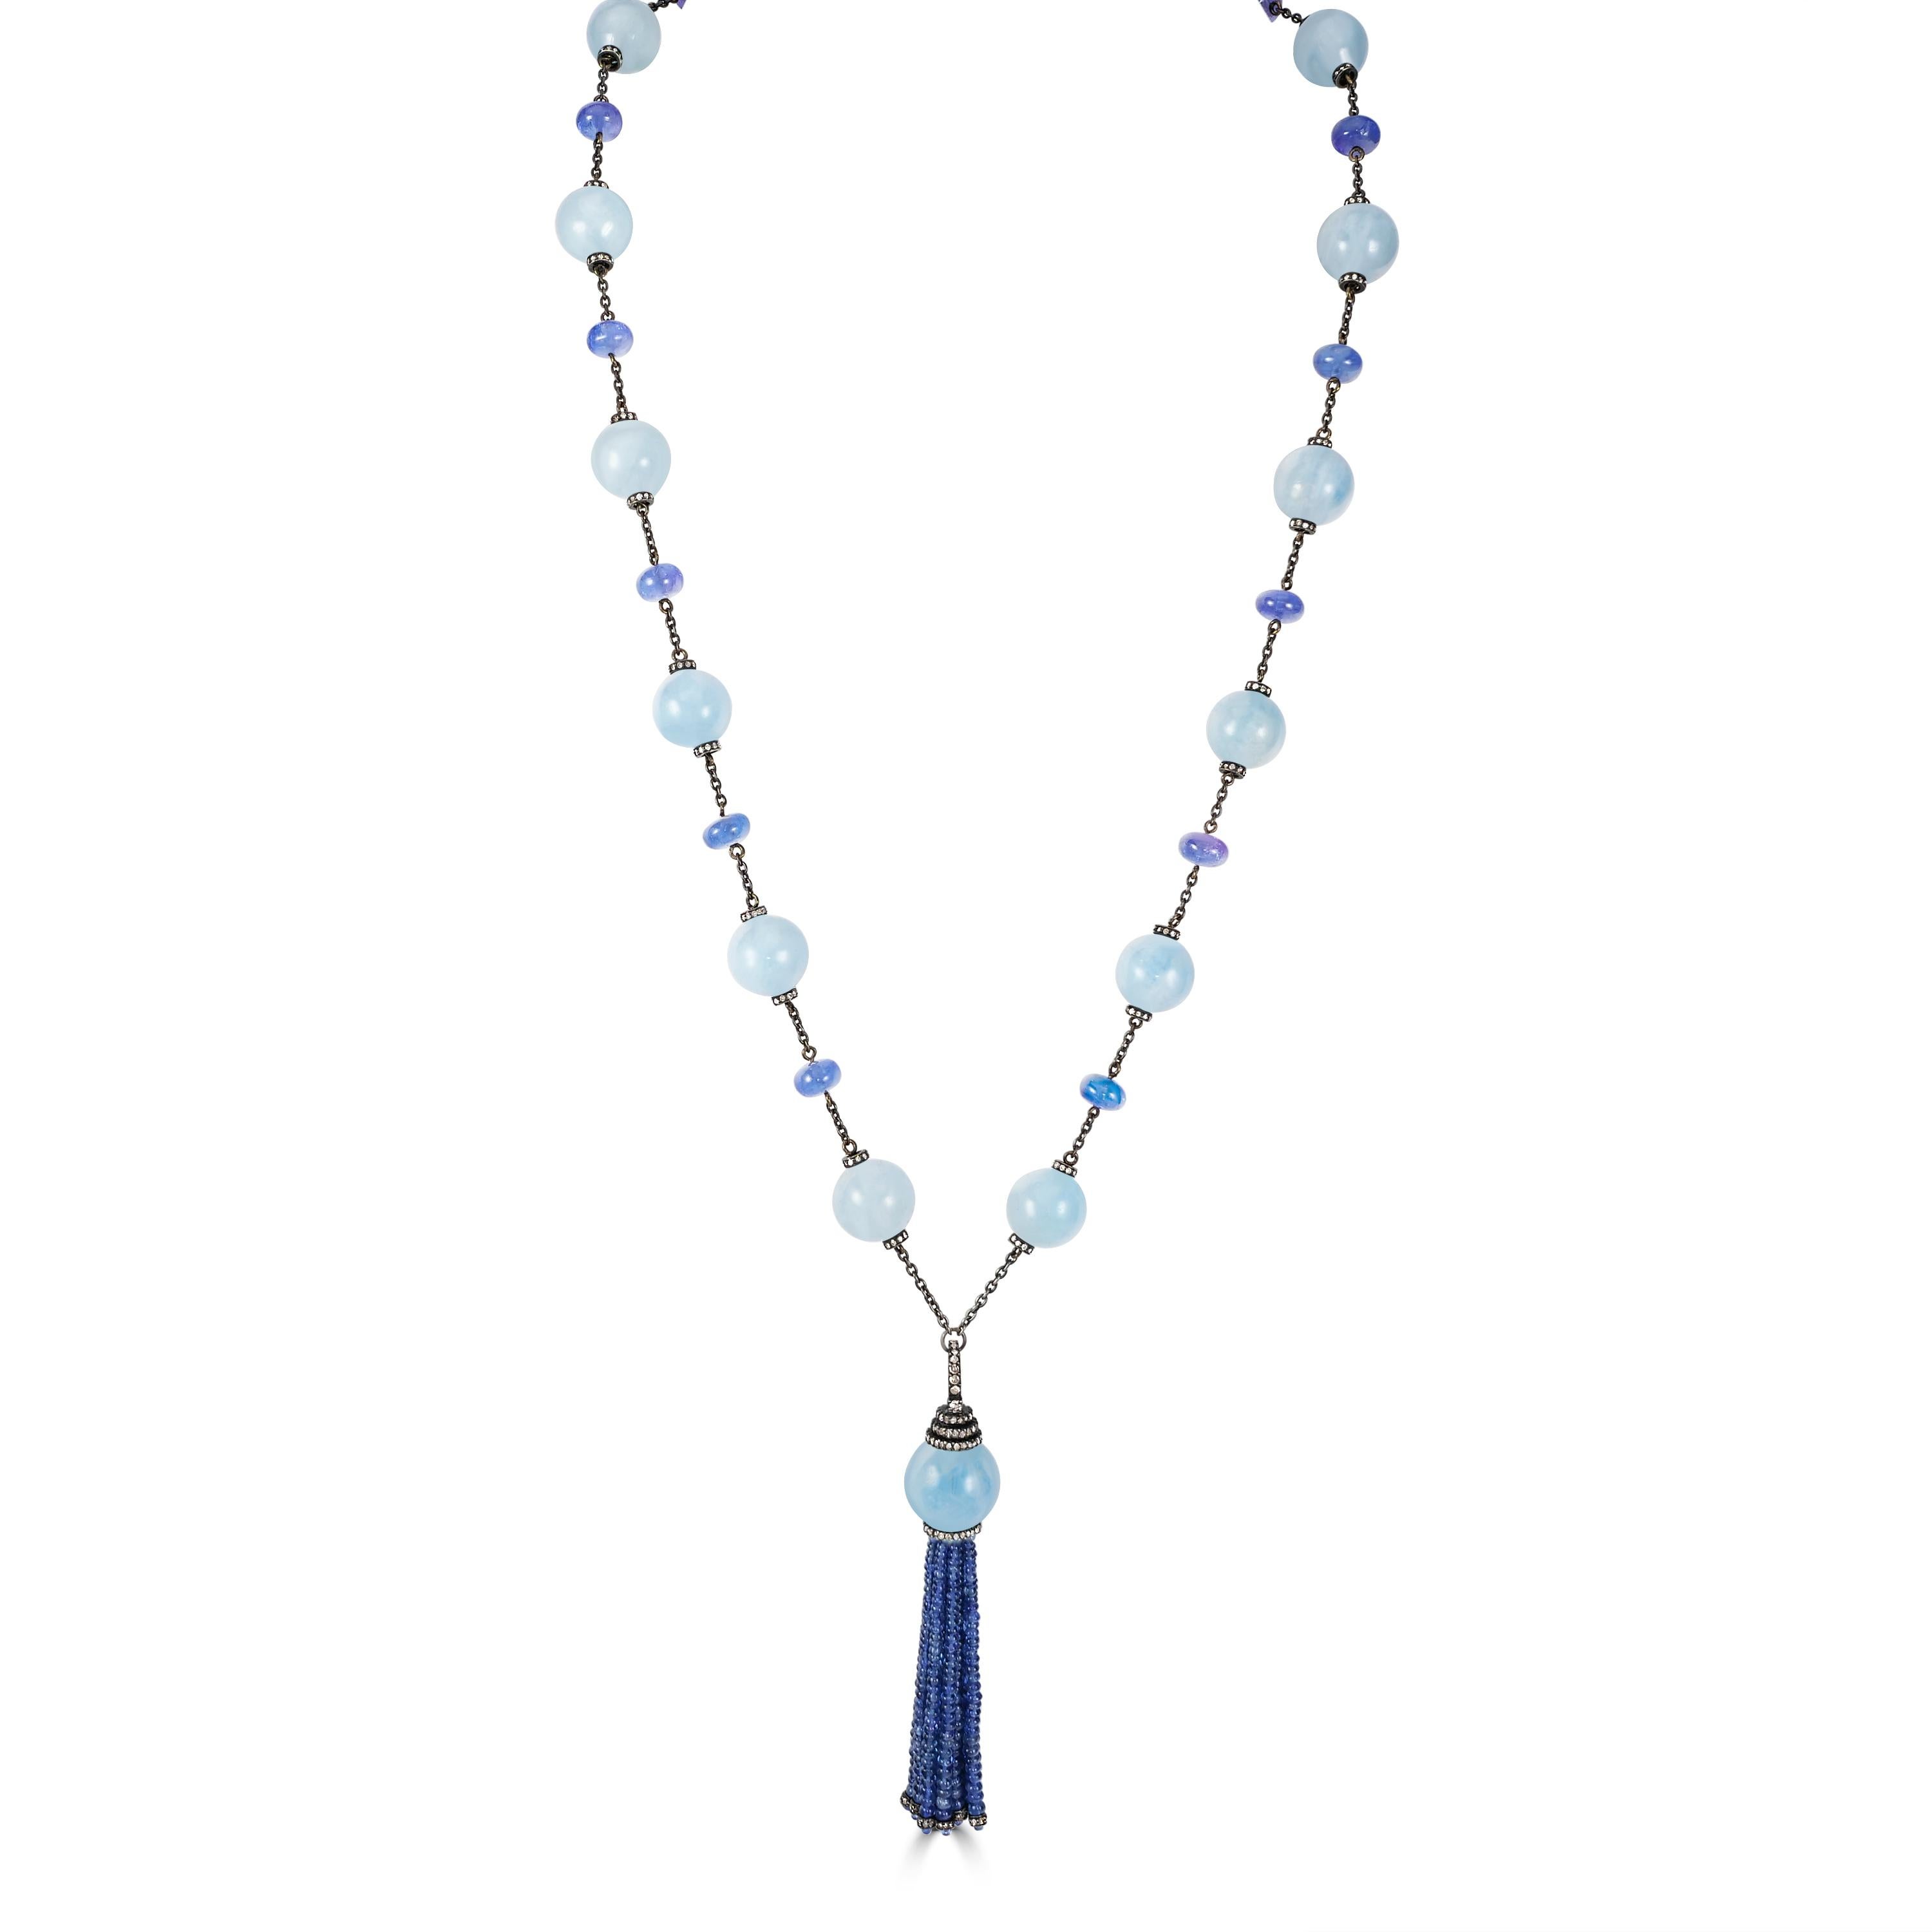 Introducing our opulent Victorian 439 Cttw. Milky Aquamarine , Blue Sapphire, and Diamond Tassel Necklace, a statement piece that epitomizes luxury and sophistication.

At the heart of this necklace is a magnificent tassel crafted from round blue